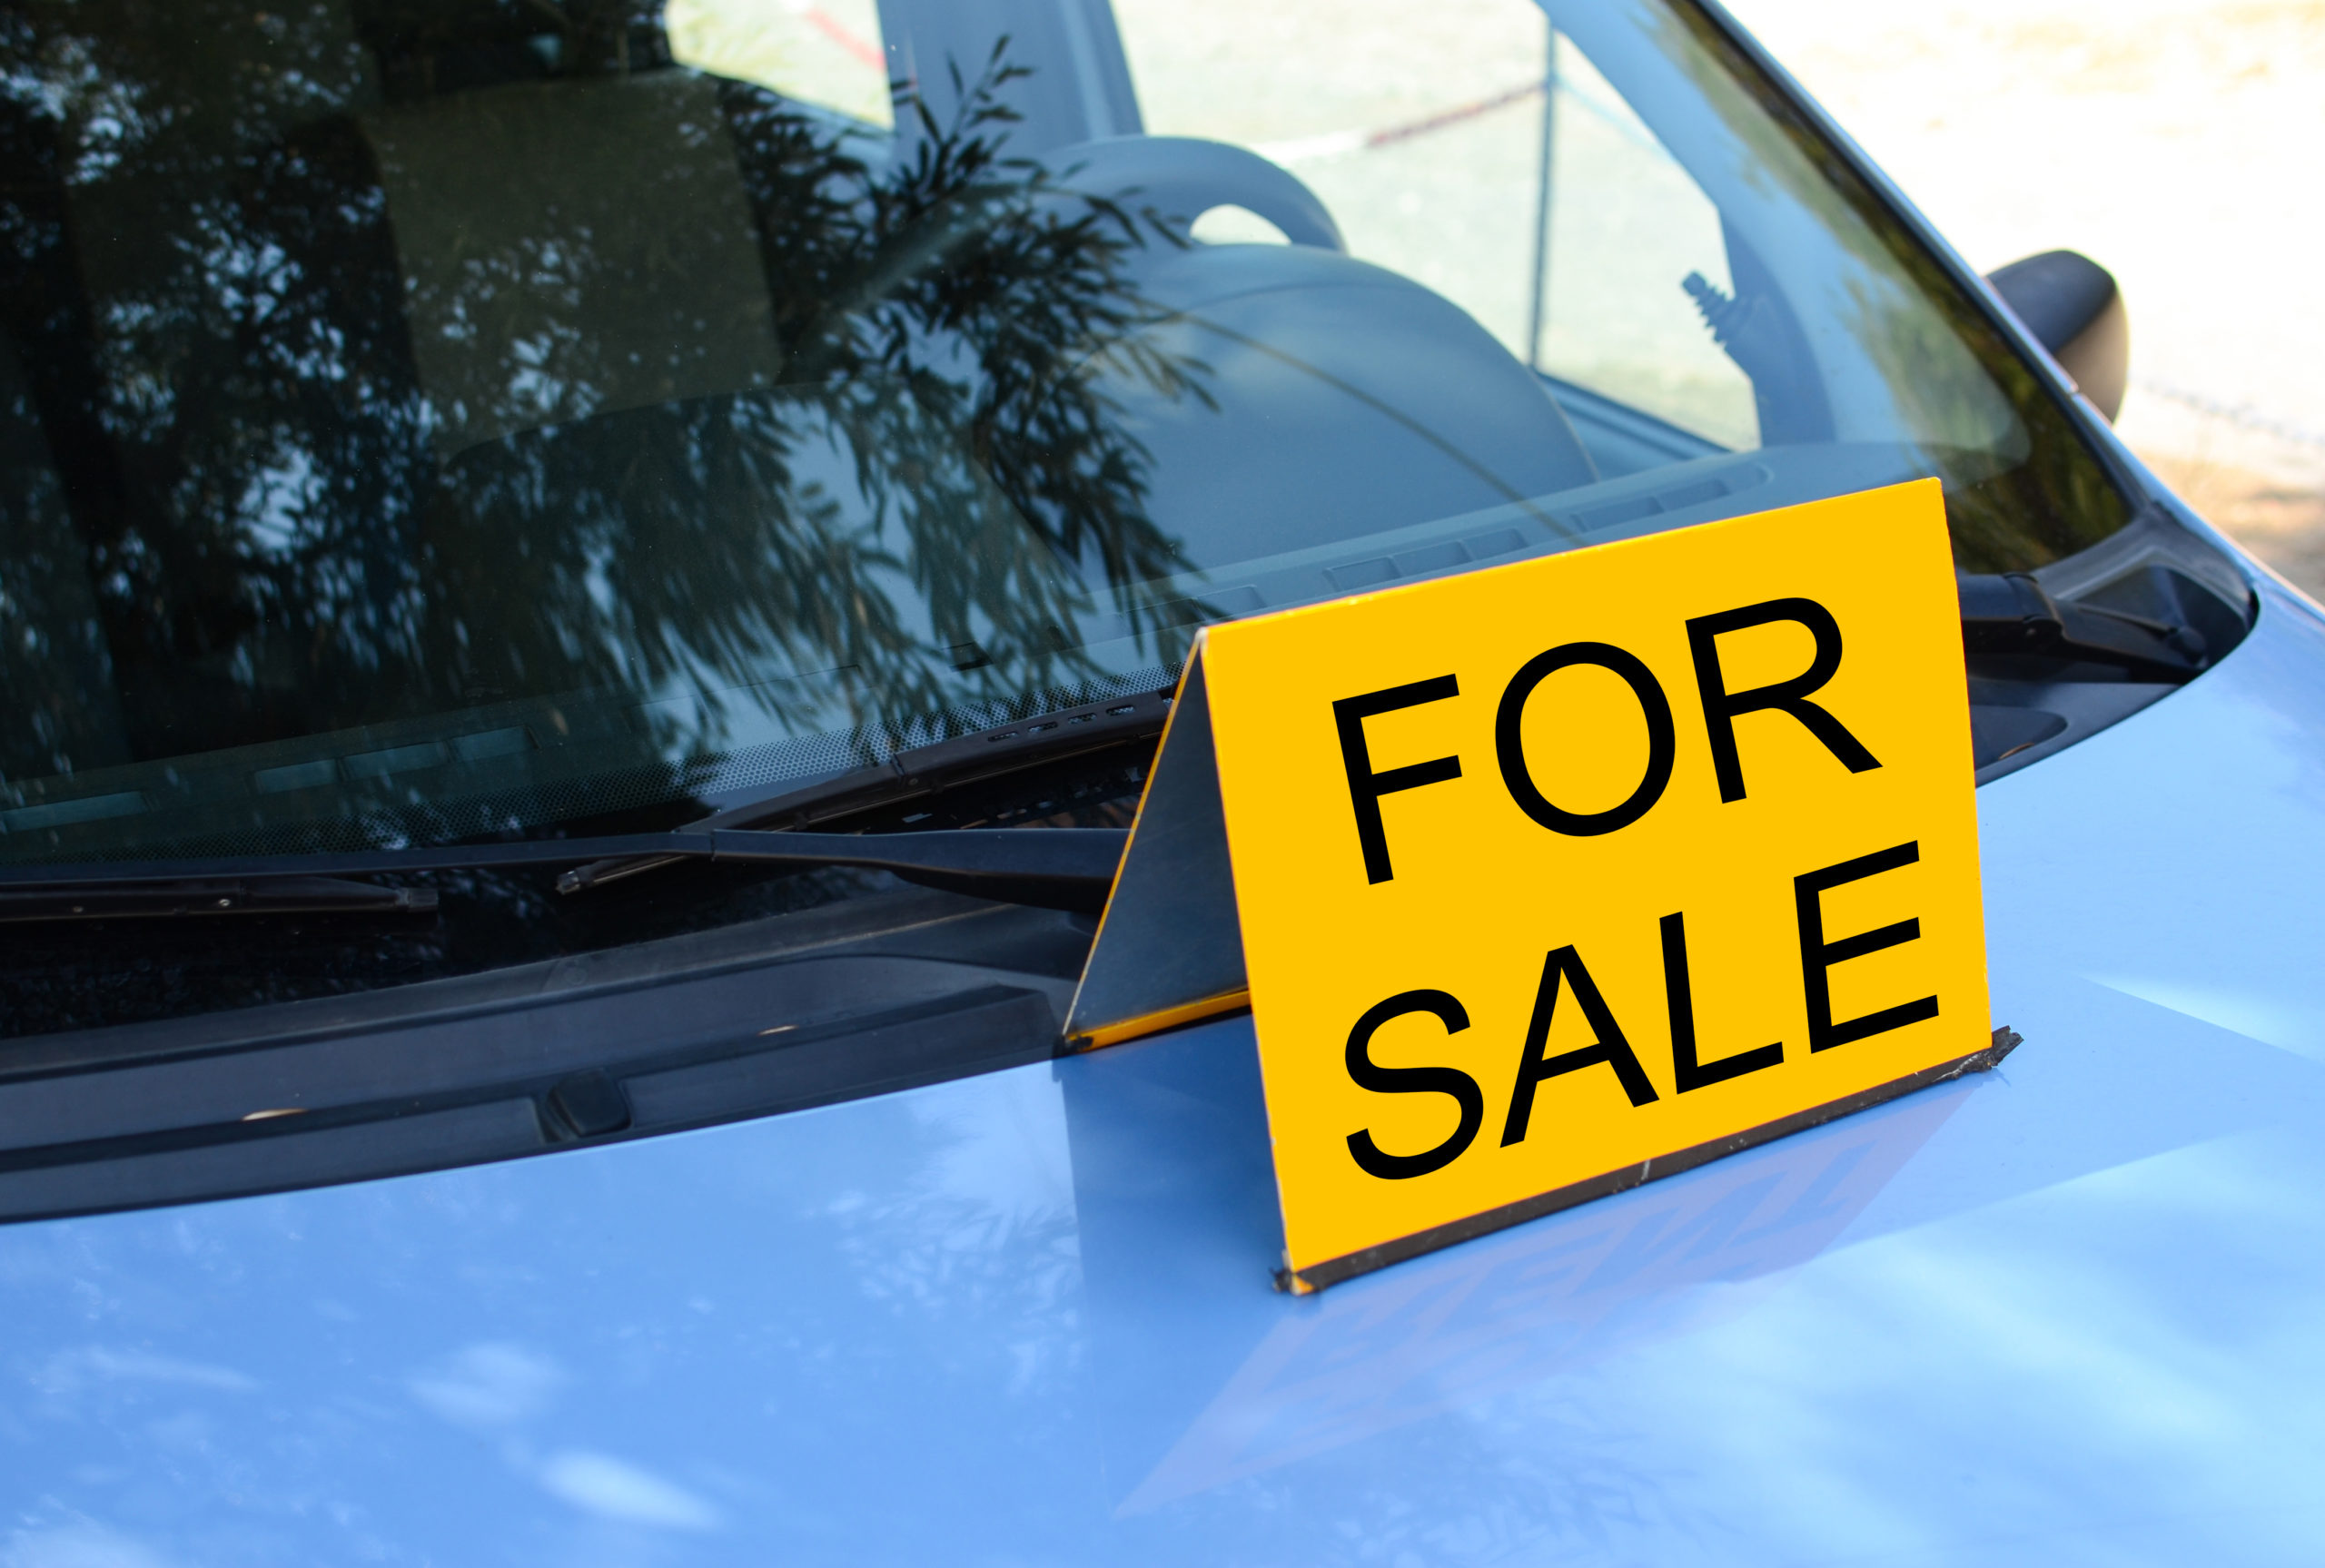 How Long Does It Take To Sell My Car?